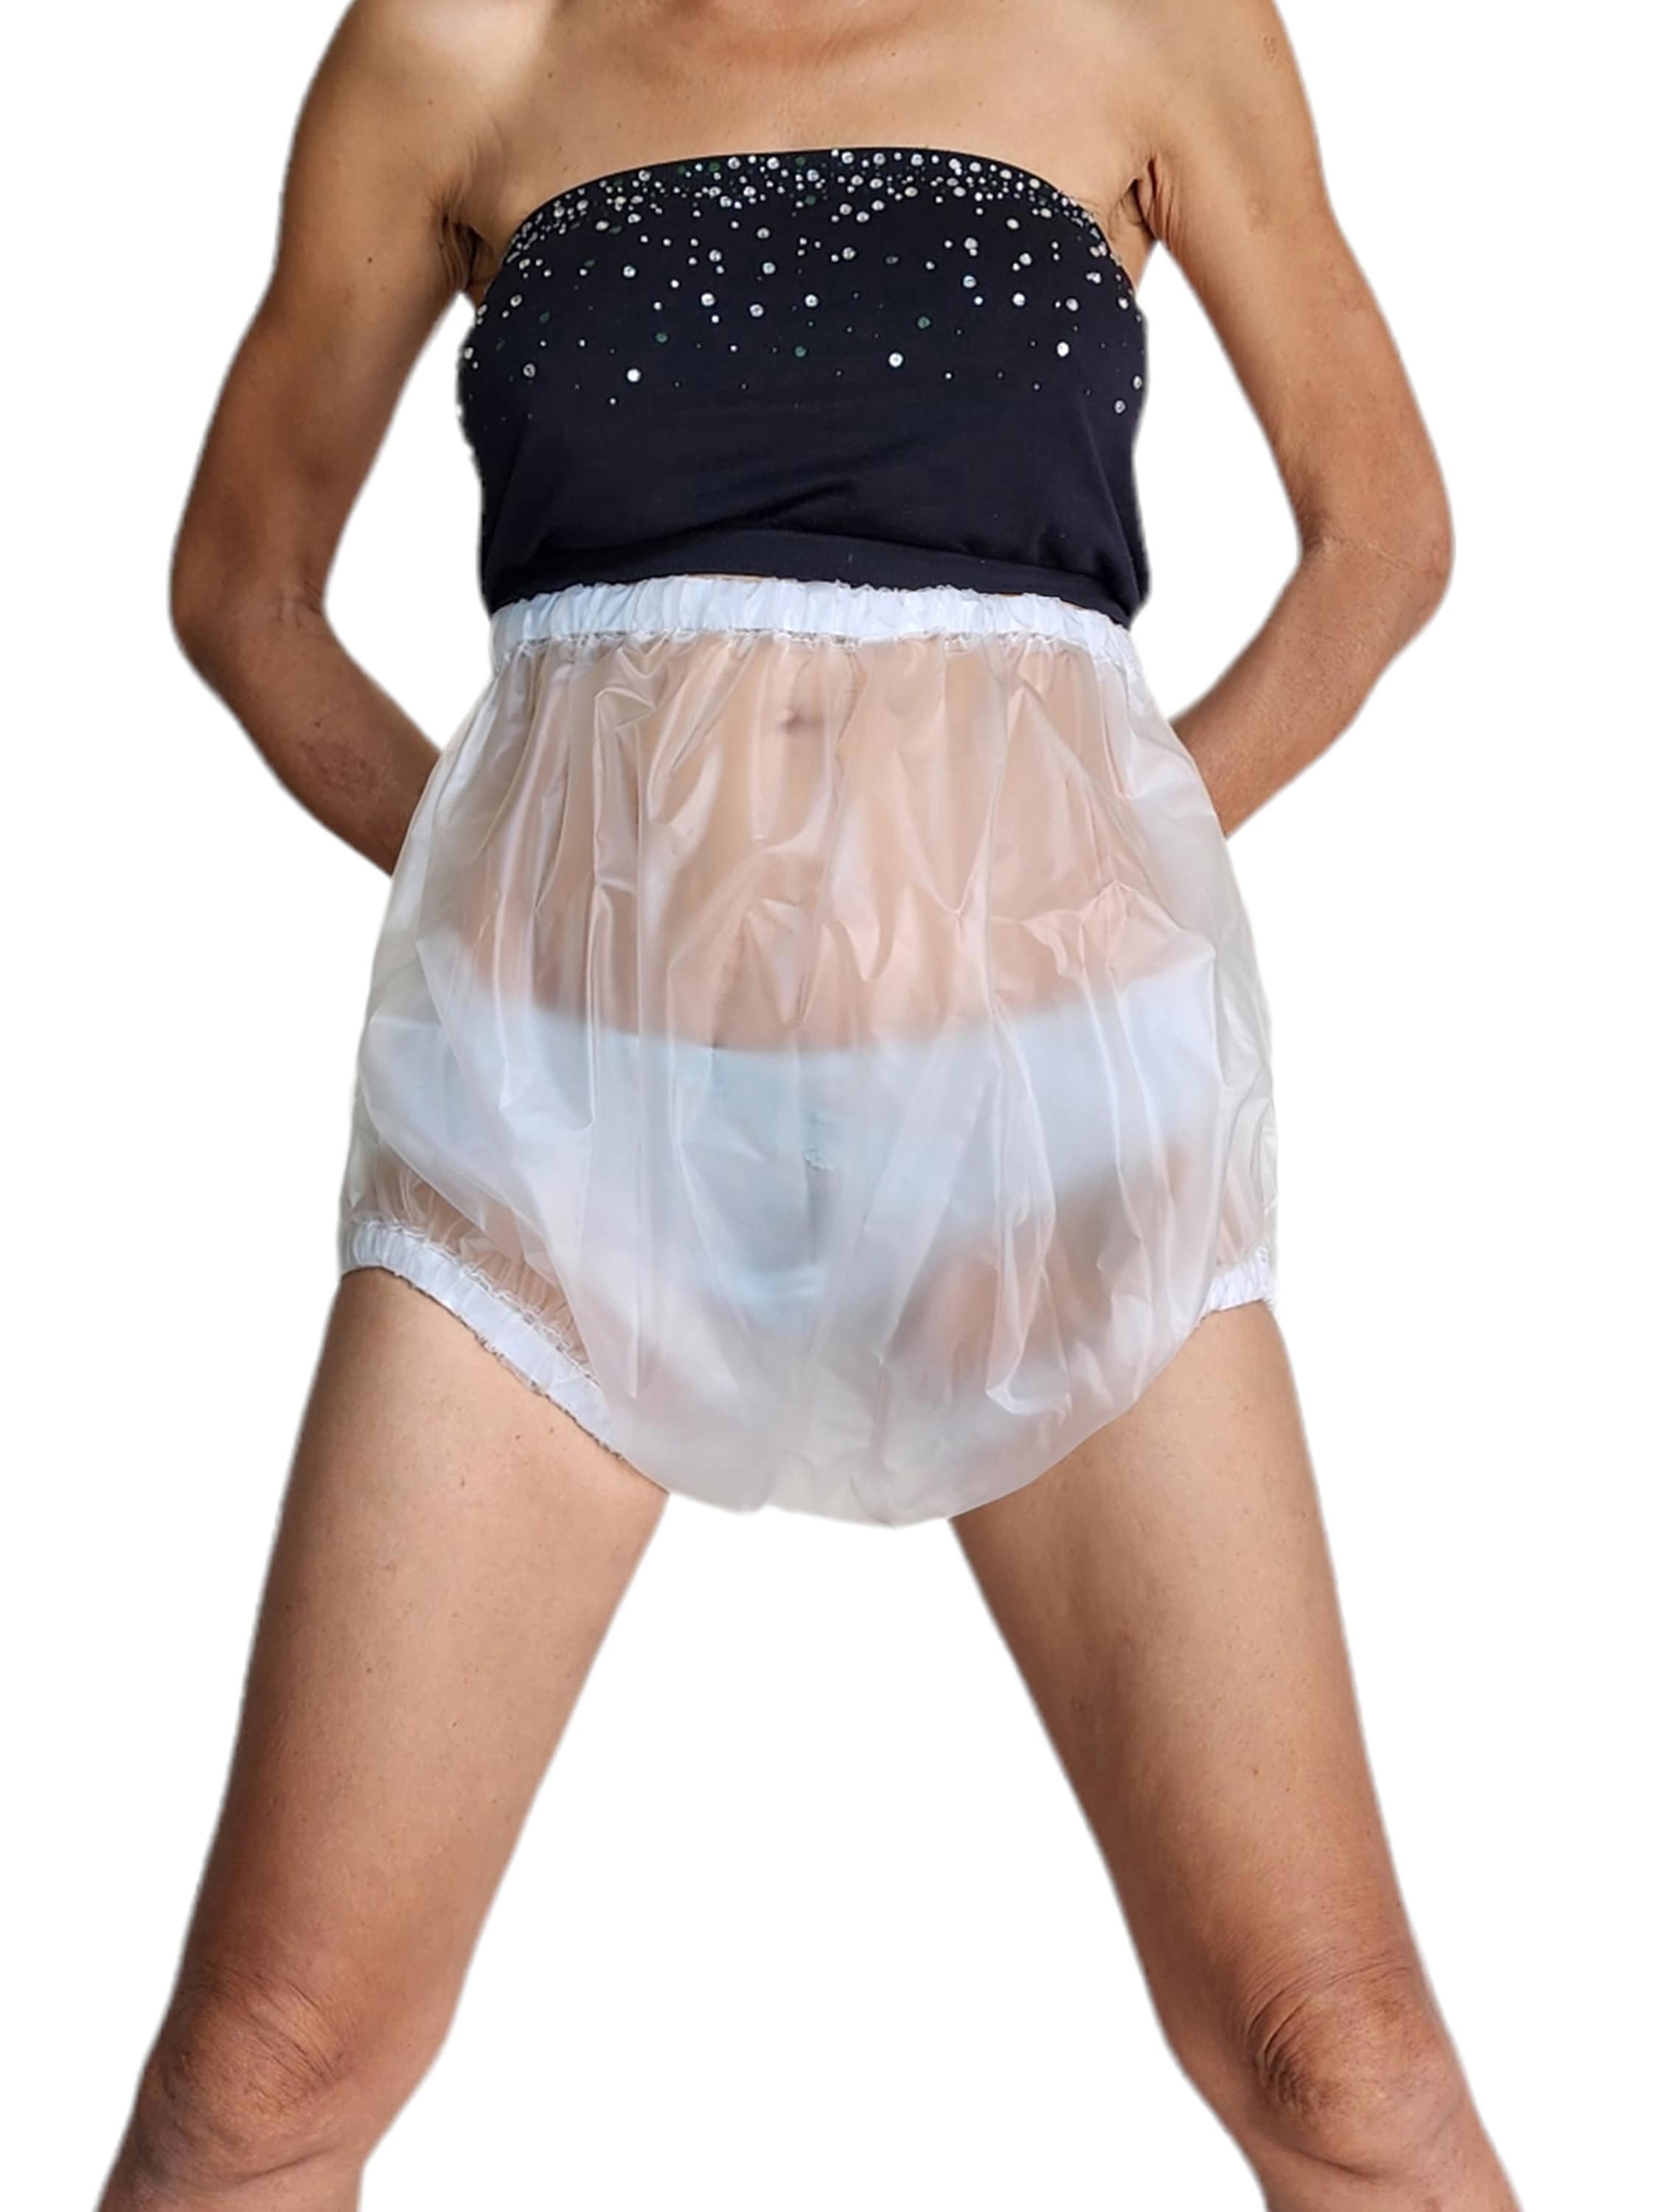 Adult Baby PLASTIC PANTS. Baby Soft Translucent. Comfy, Sissy. Abdl Pvc  Pants. Large Leg. Wide Crotch. Waterproof. Can Make to Order Too. -   Canada